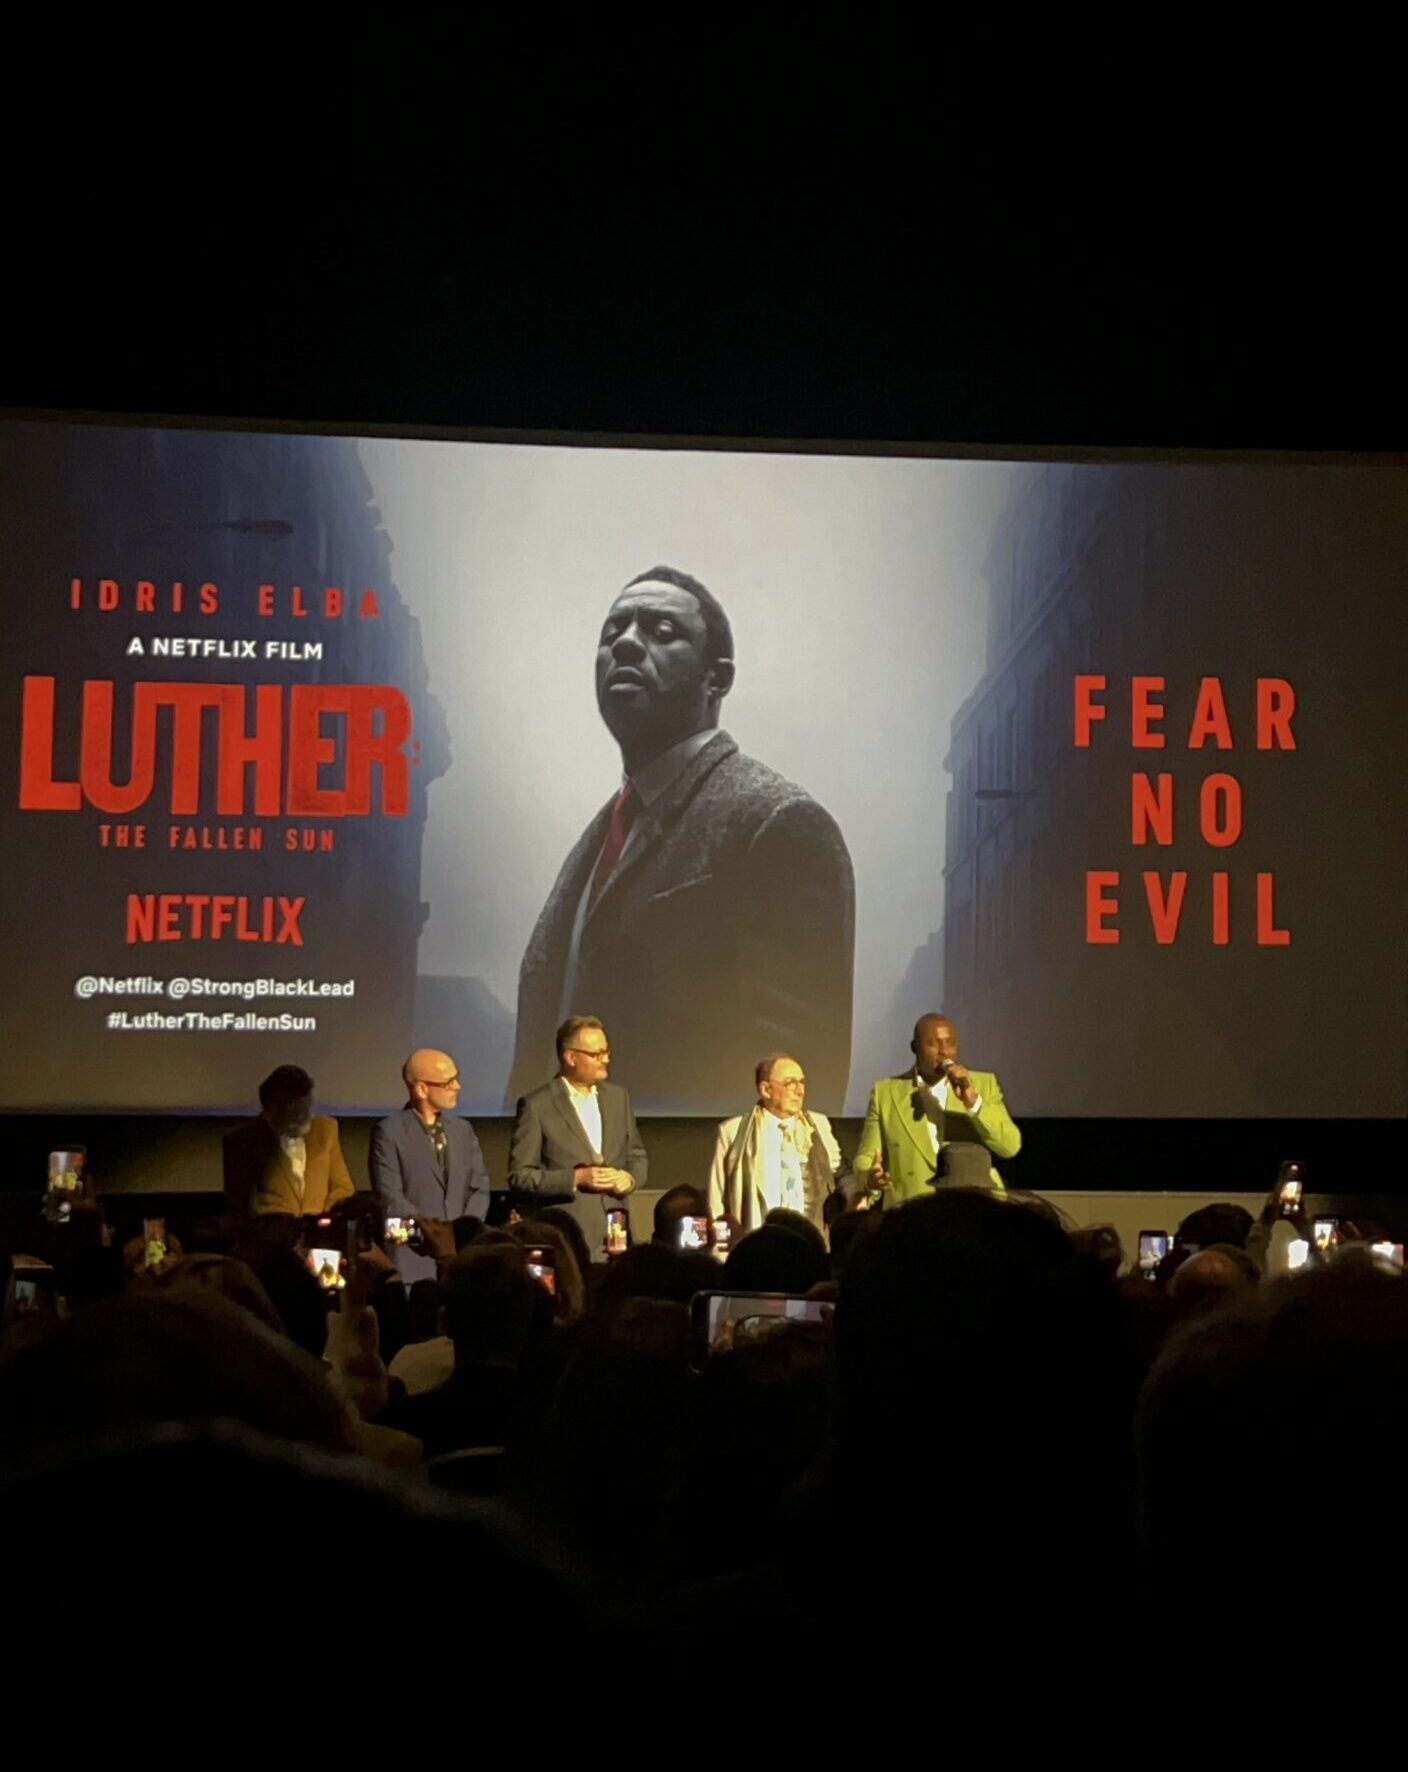 The “Luther” cast host a Q and A session with the audience at the Paris Theater.